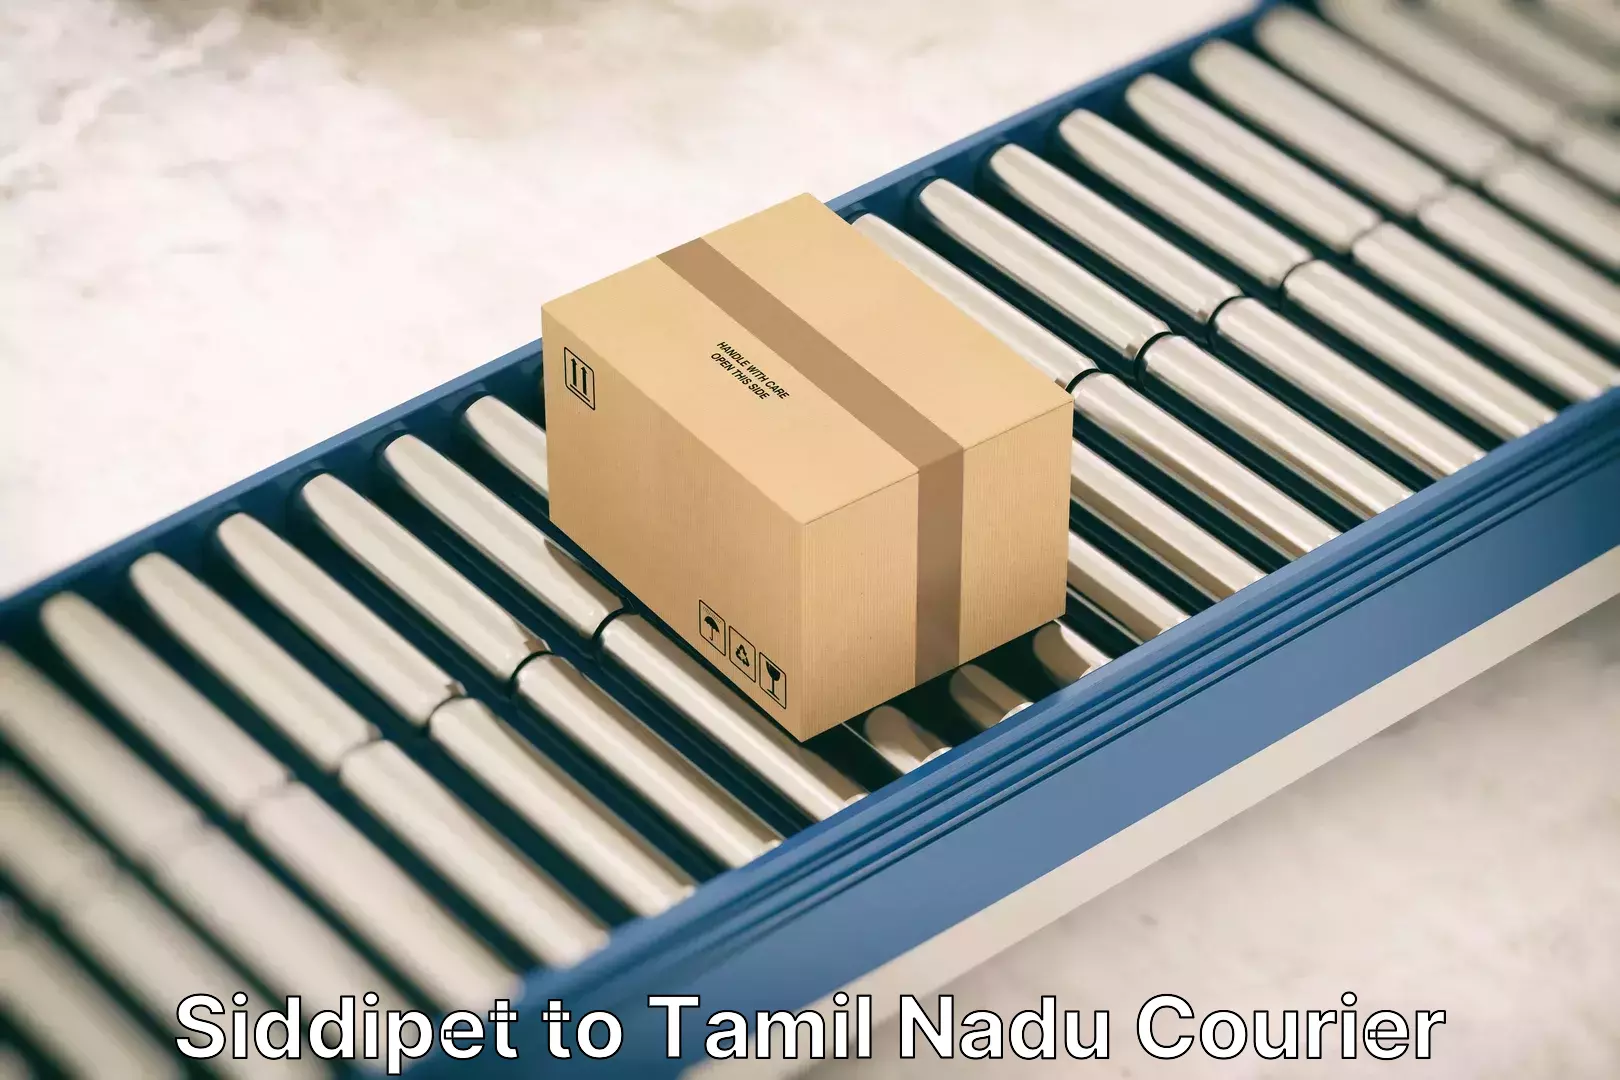 Trusted relocation experts Siddipet to Tamil Nadu